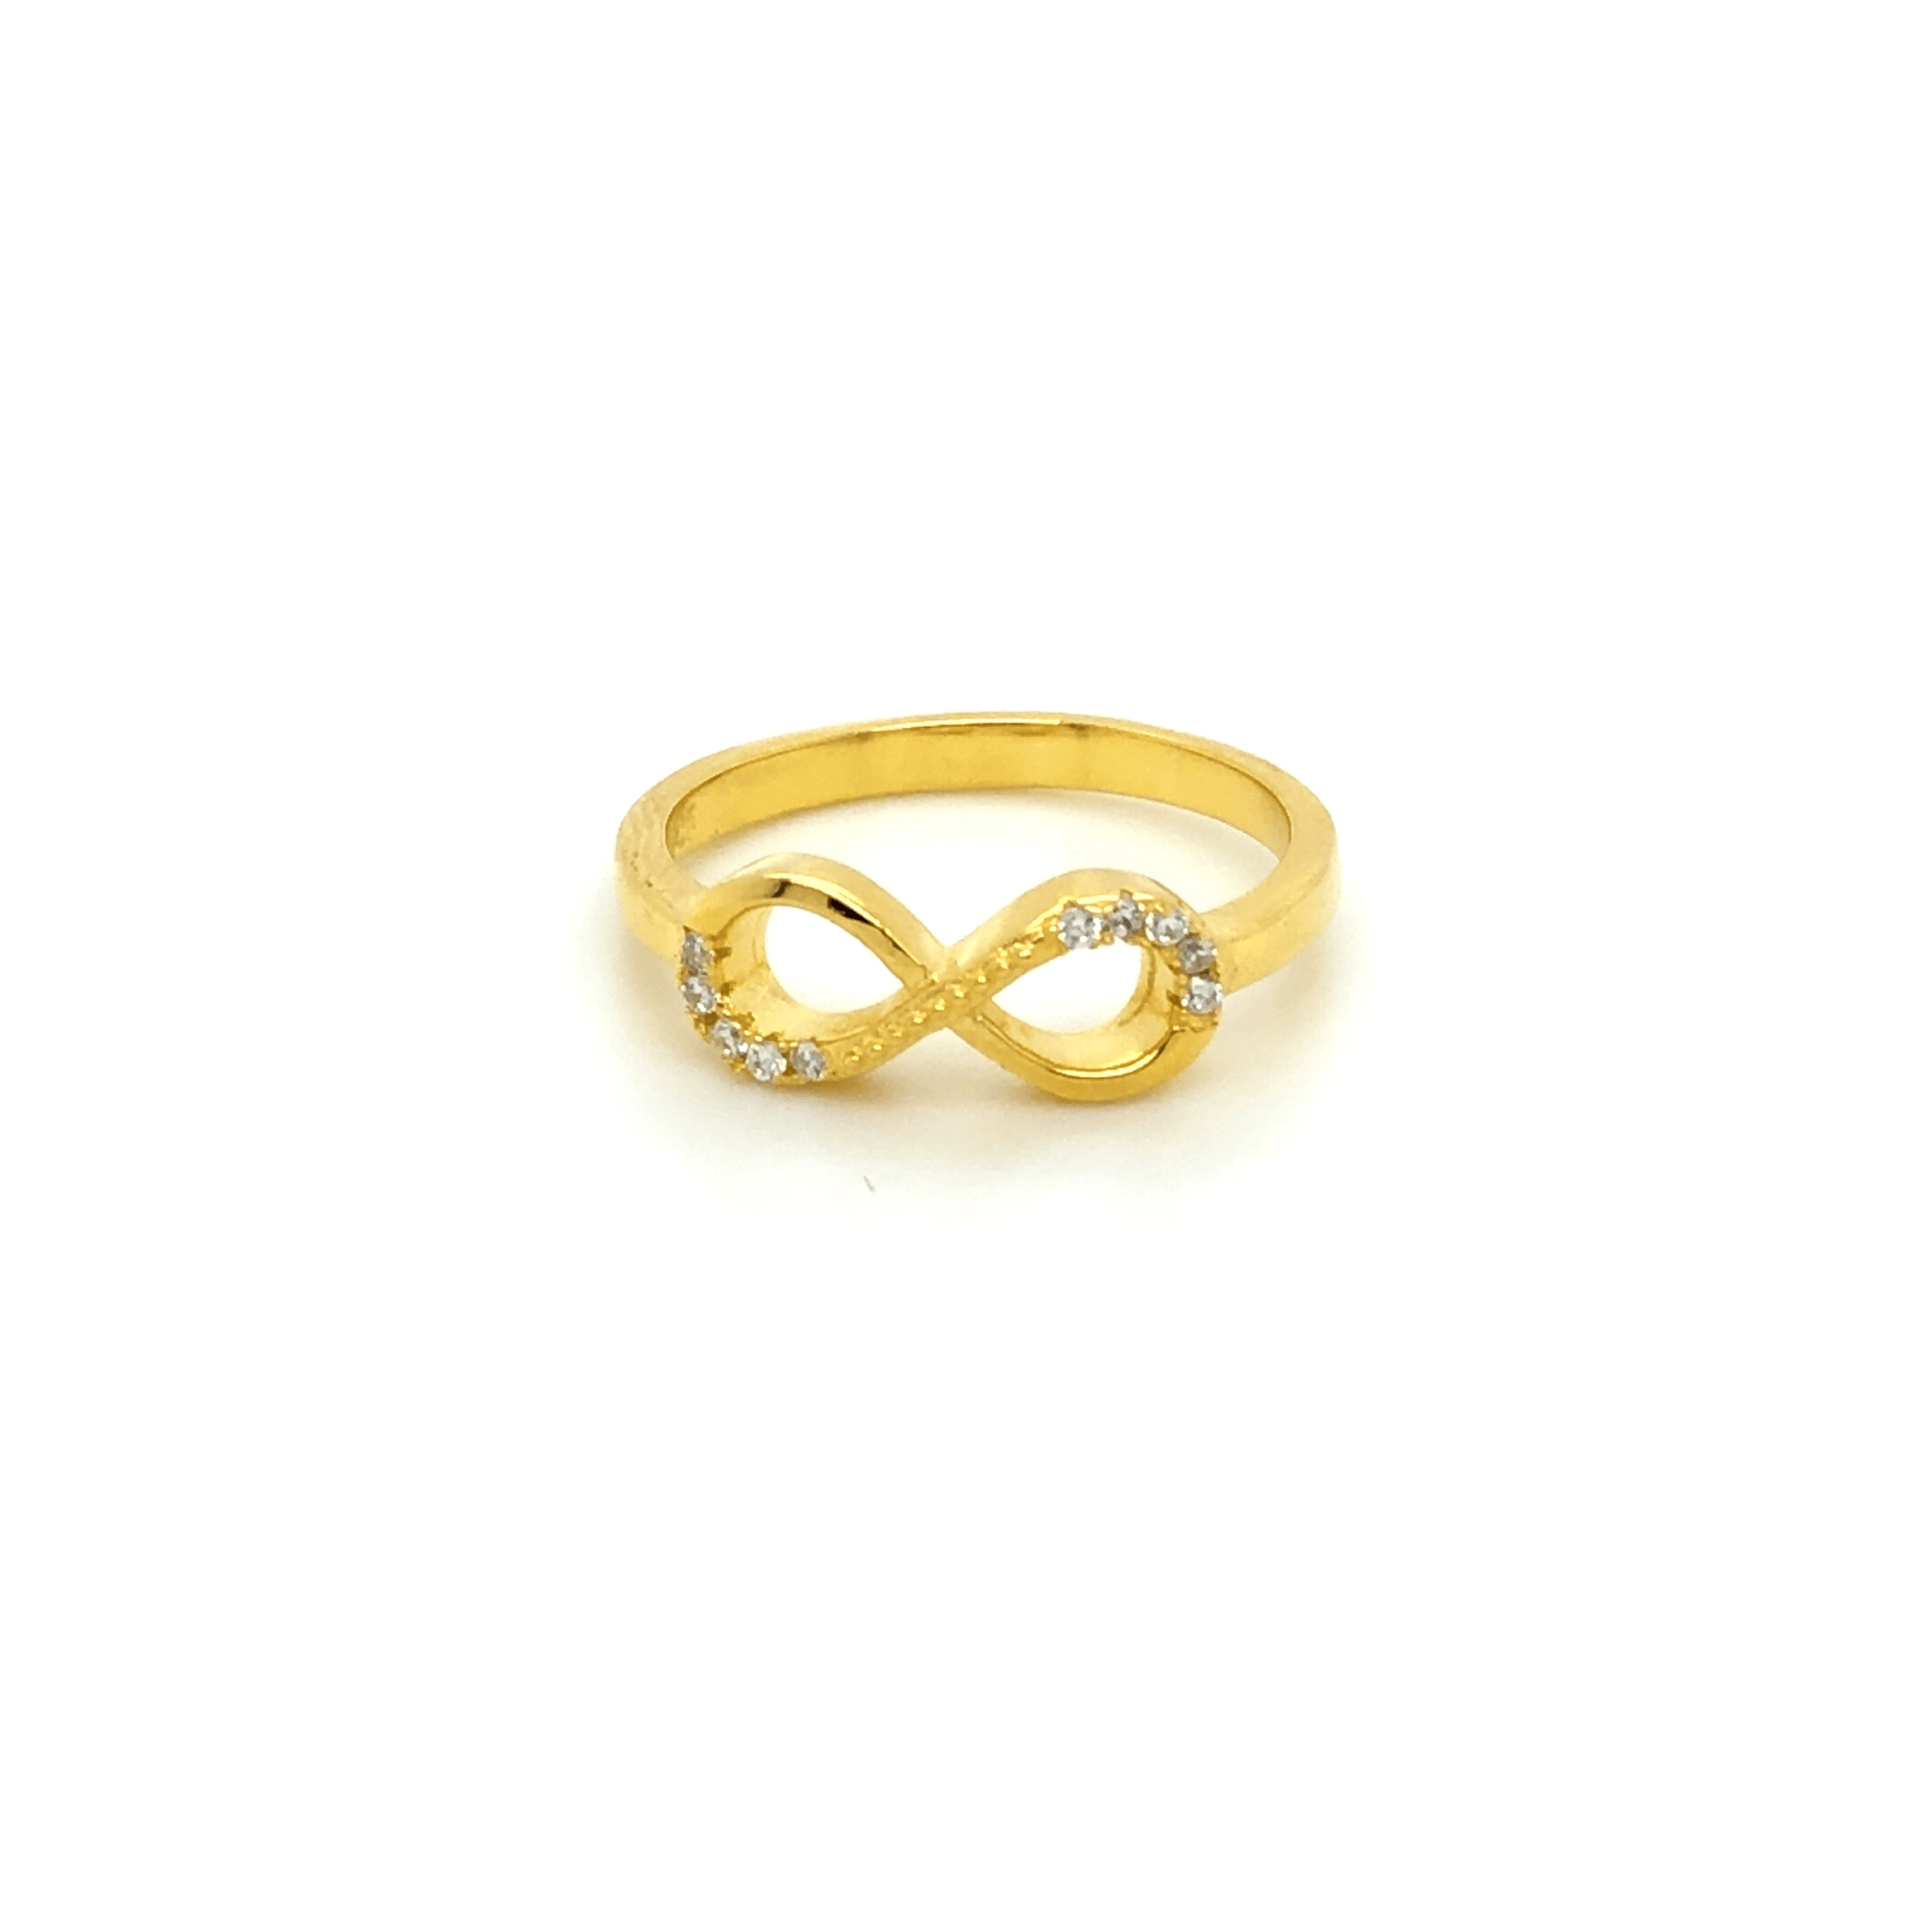 Sparkle Infinity Ring - Findings & Connections